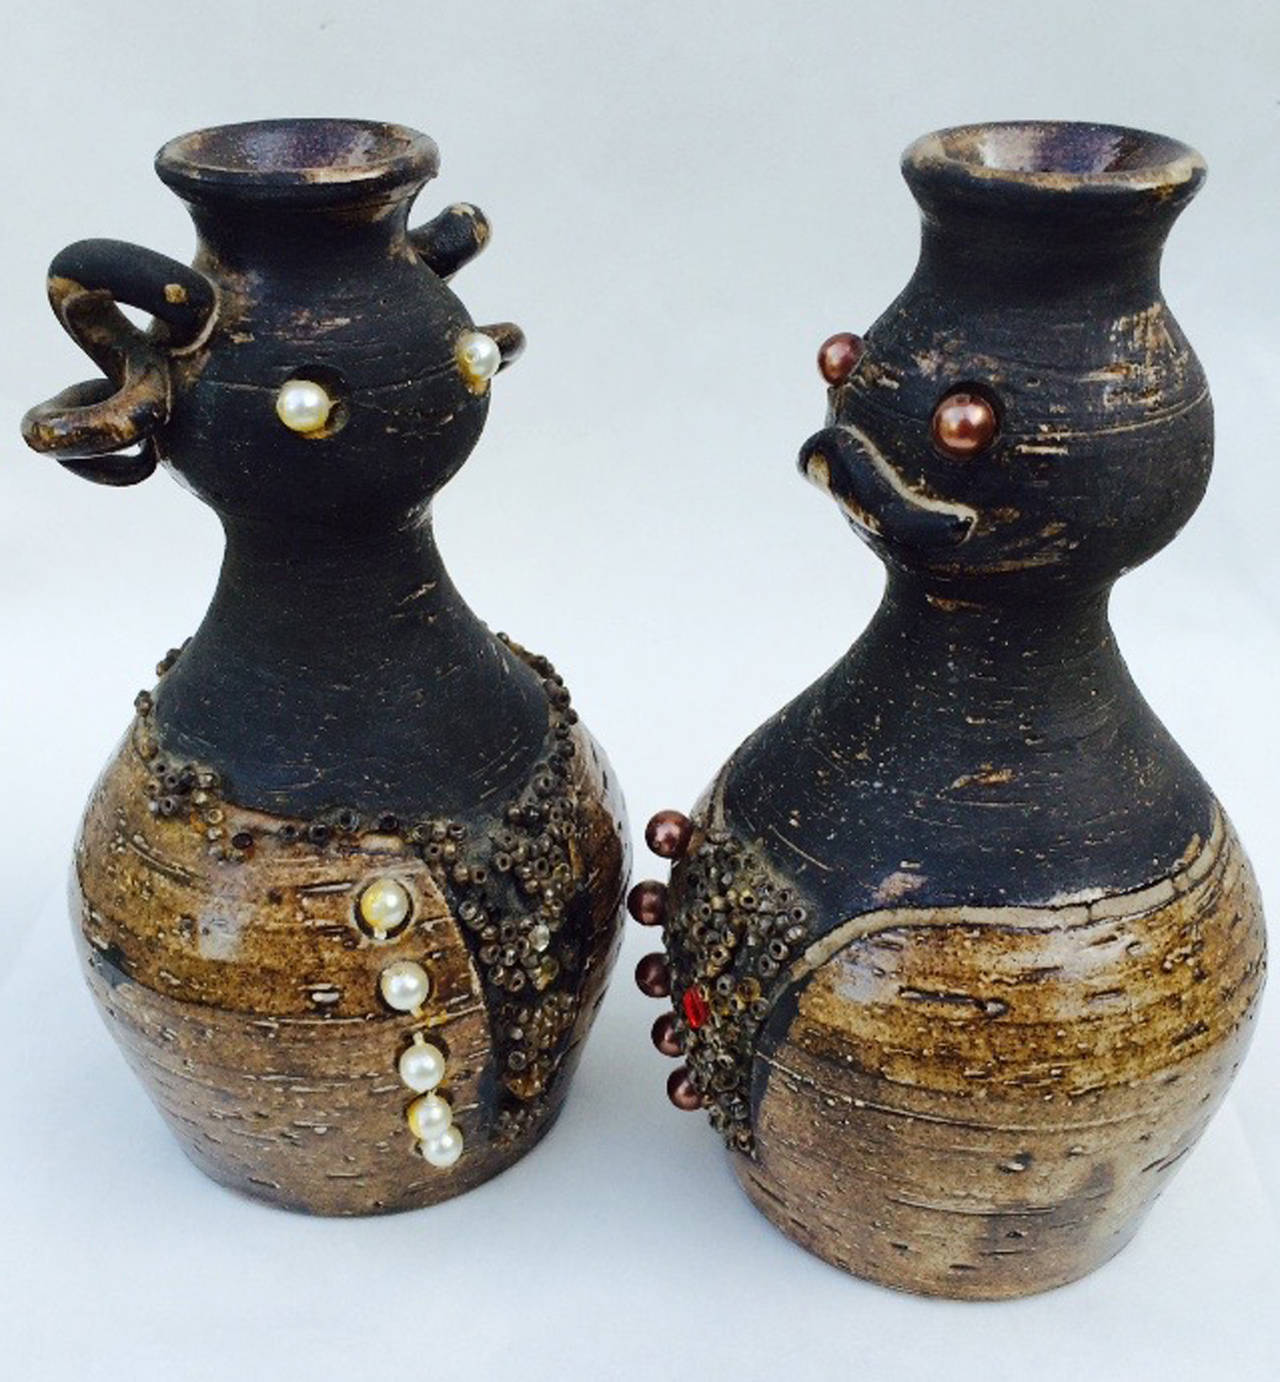 A fine and rare pair Bo Borgstrom ceramic bottles. Authentic signed ceramic male and female forms feature additional glass bead, faux pearl and crystal applied decorations. Additional signature for Margit Borgstrom (MF). Single cork stopper intact